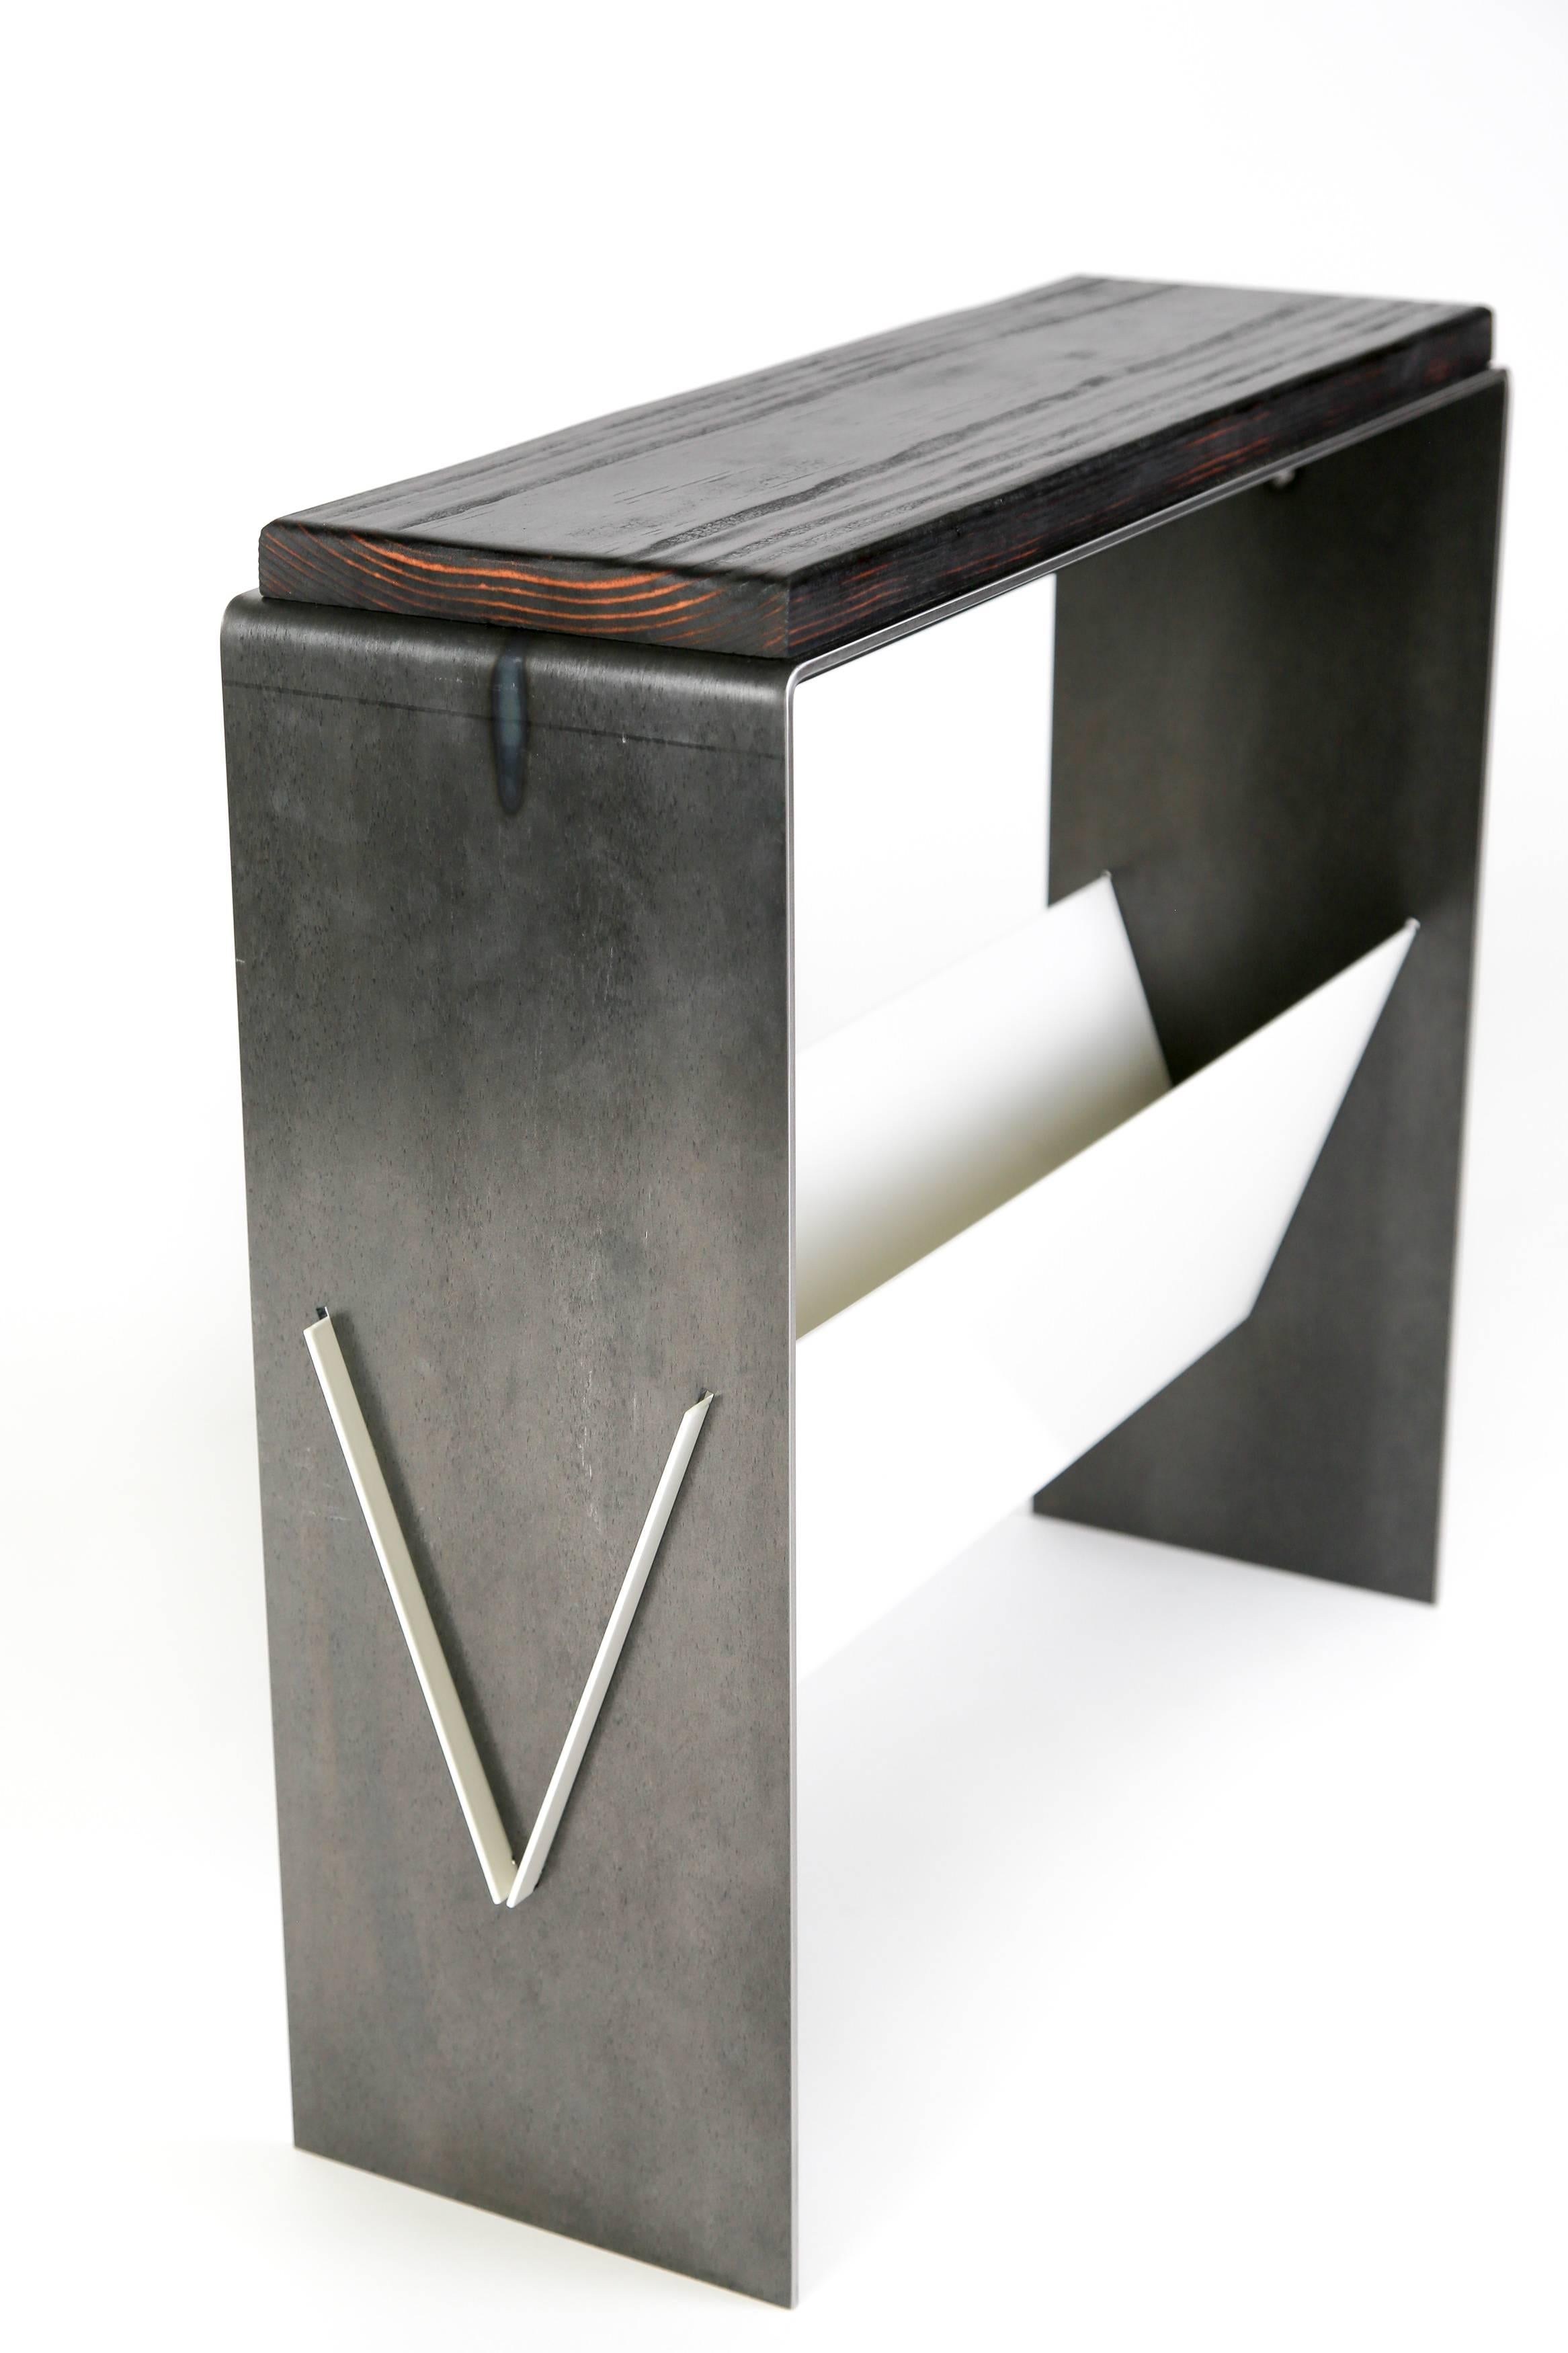 This simple side table or end table brings a modern aesthetic of simplicity and cleanliness. A versatile table that can be used as a side table, end table, or cocktail table allows for magazine or book storage below in a sleek niche. Available in